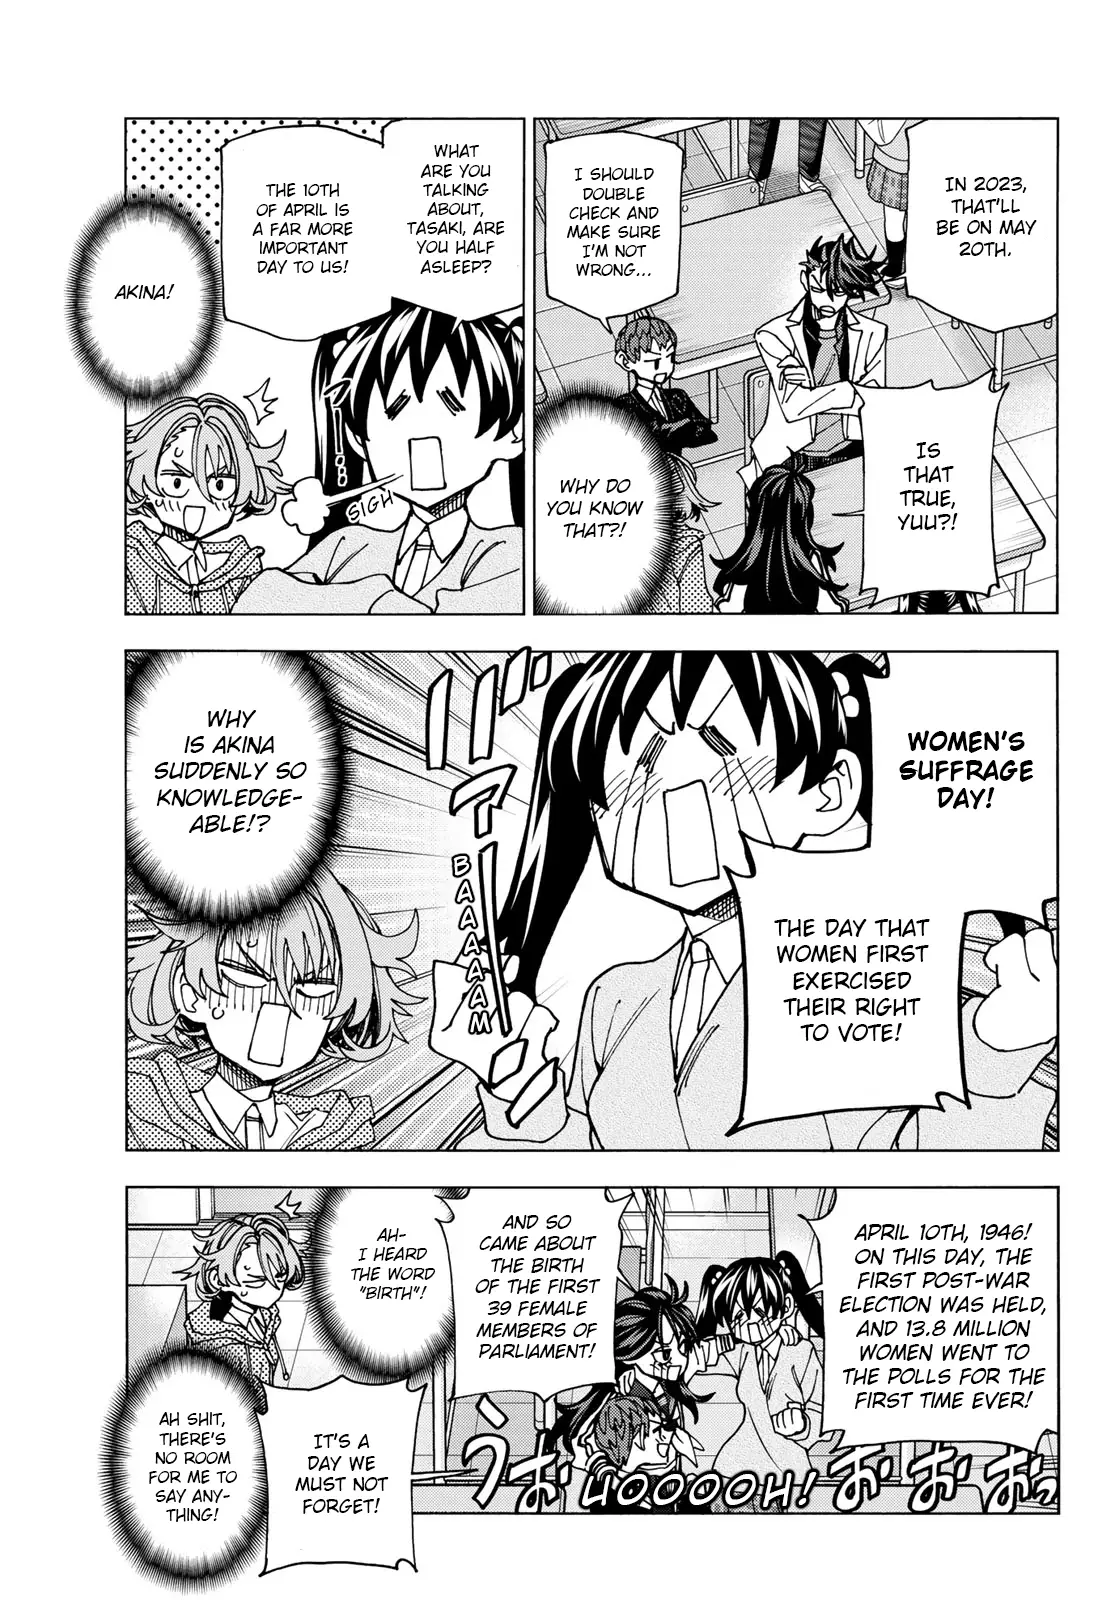 The Story Between A Dumb Prefect And A High School Girl With An Inappropriate Skirt Length - 58 page 9-ff6d43c9